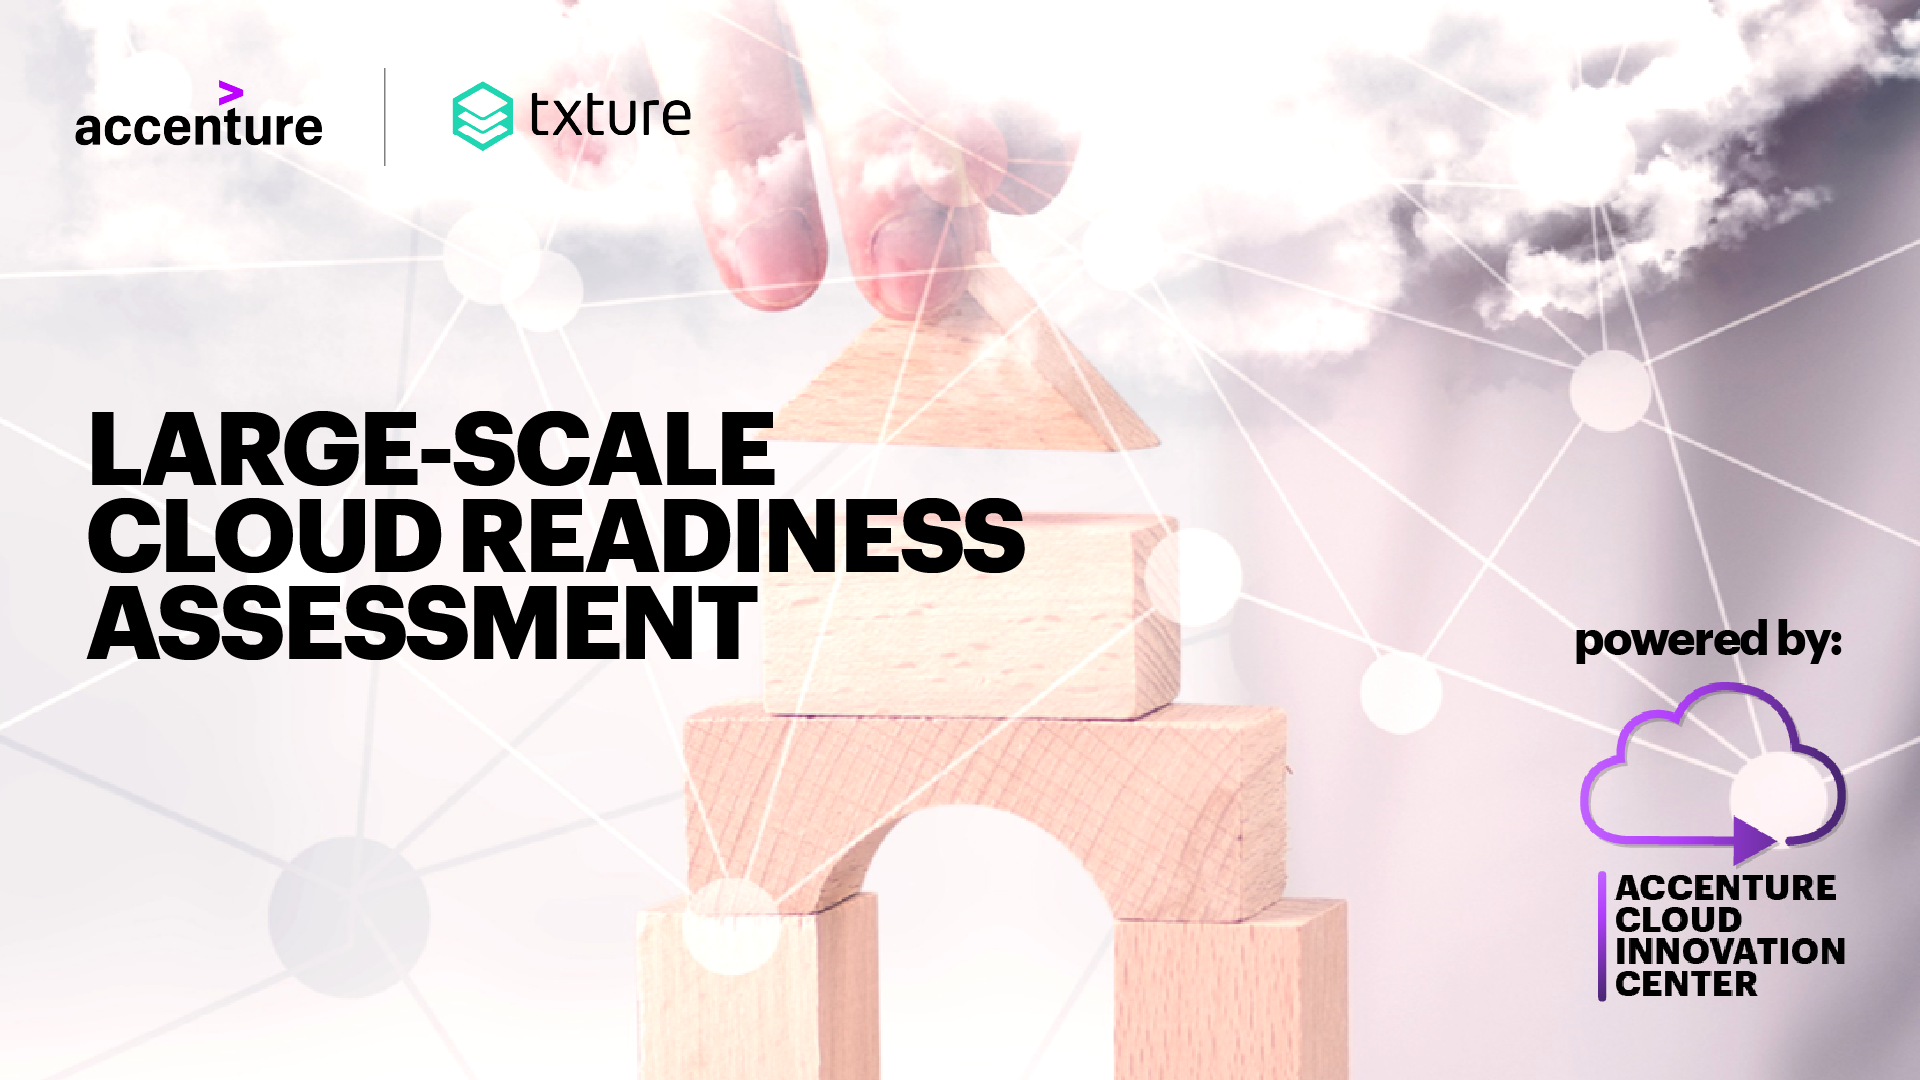 Large-scale cloud readiness assessment